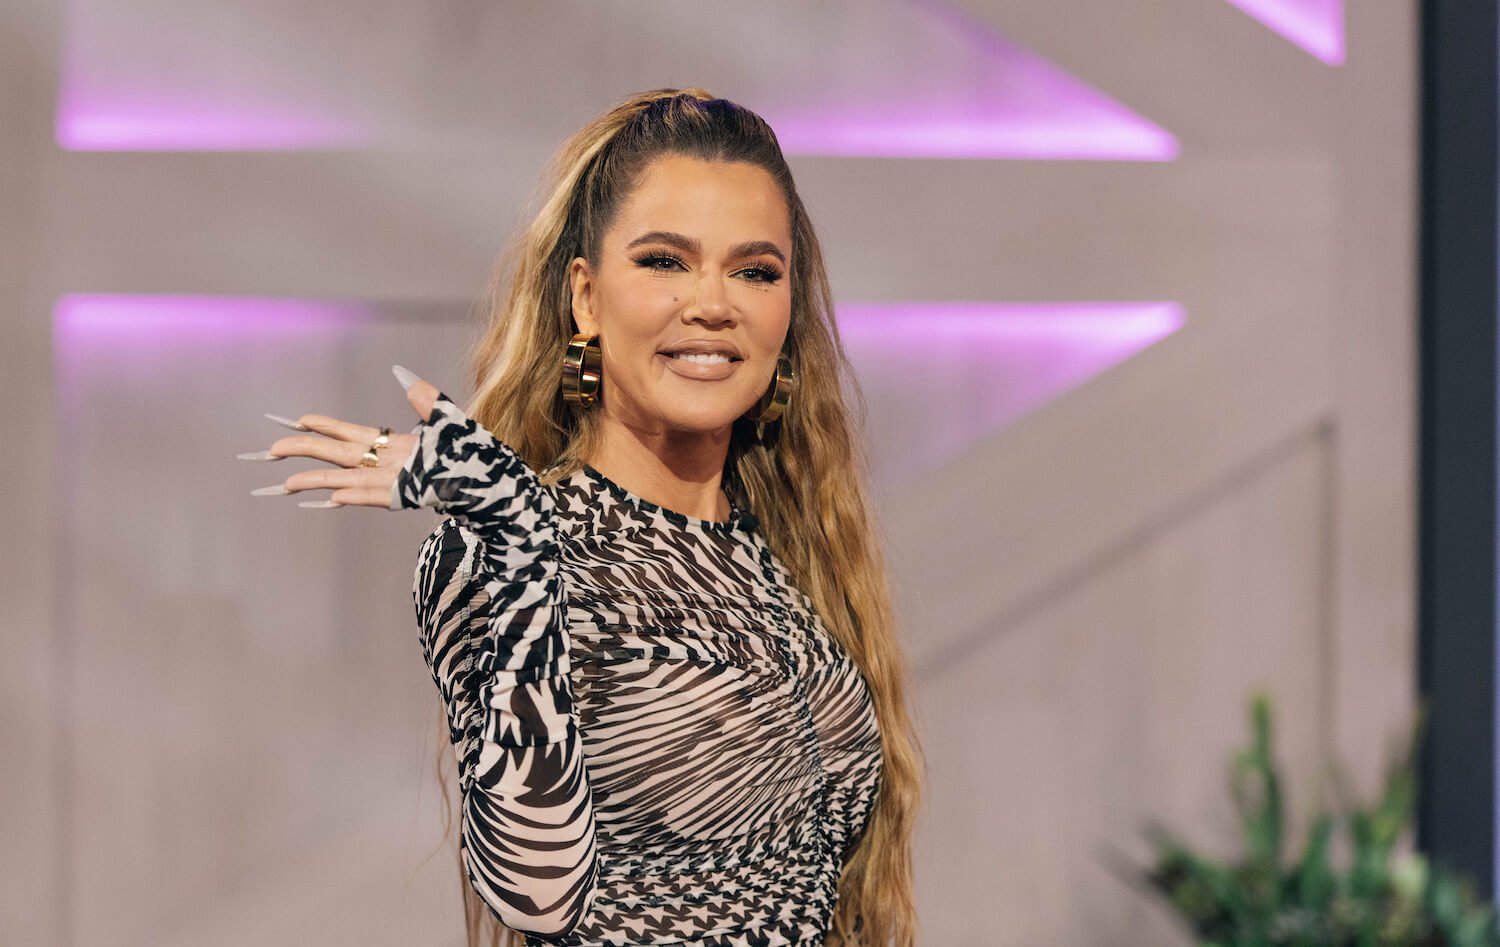 Khloé Kardashian smiling and waving before a talk show. Her hair is pulled back and she's wearing long sleeves.